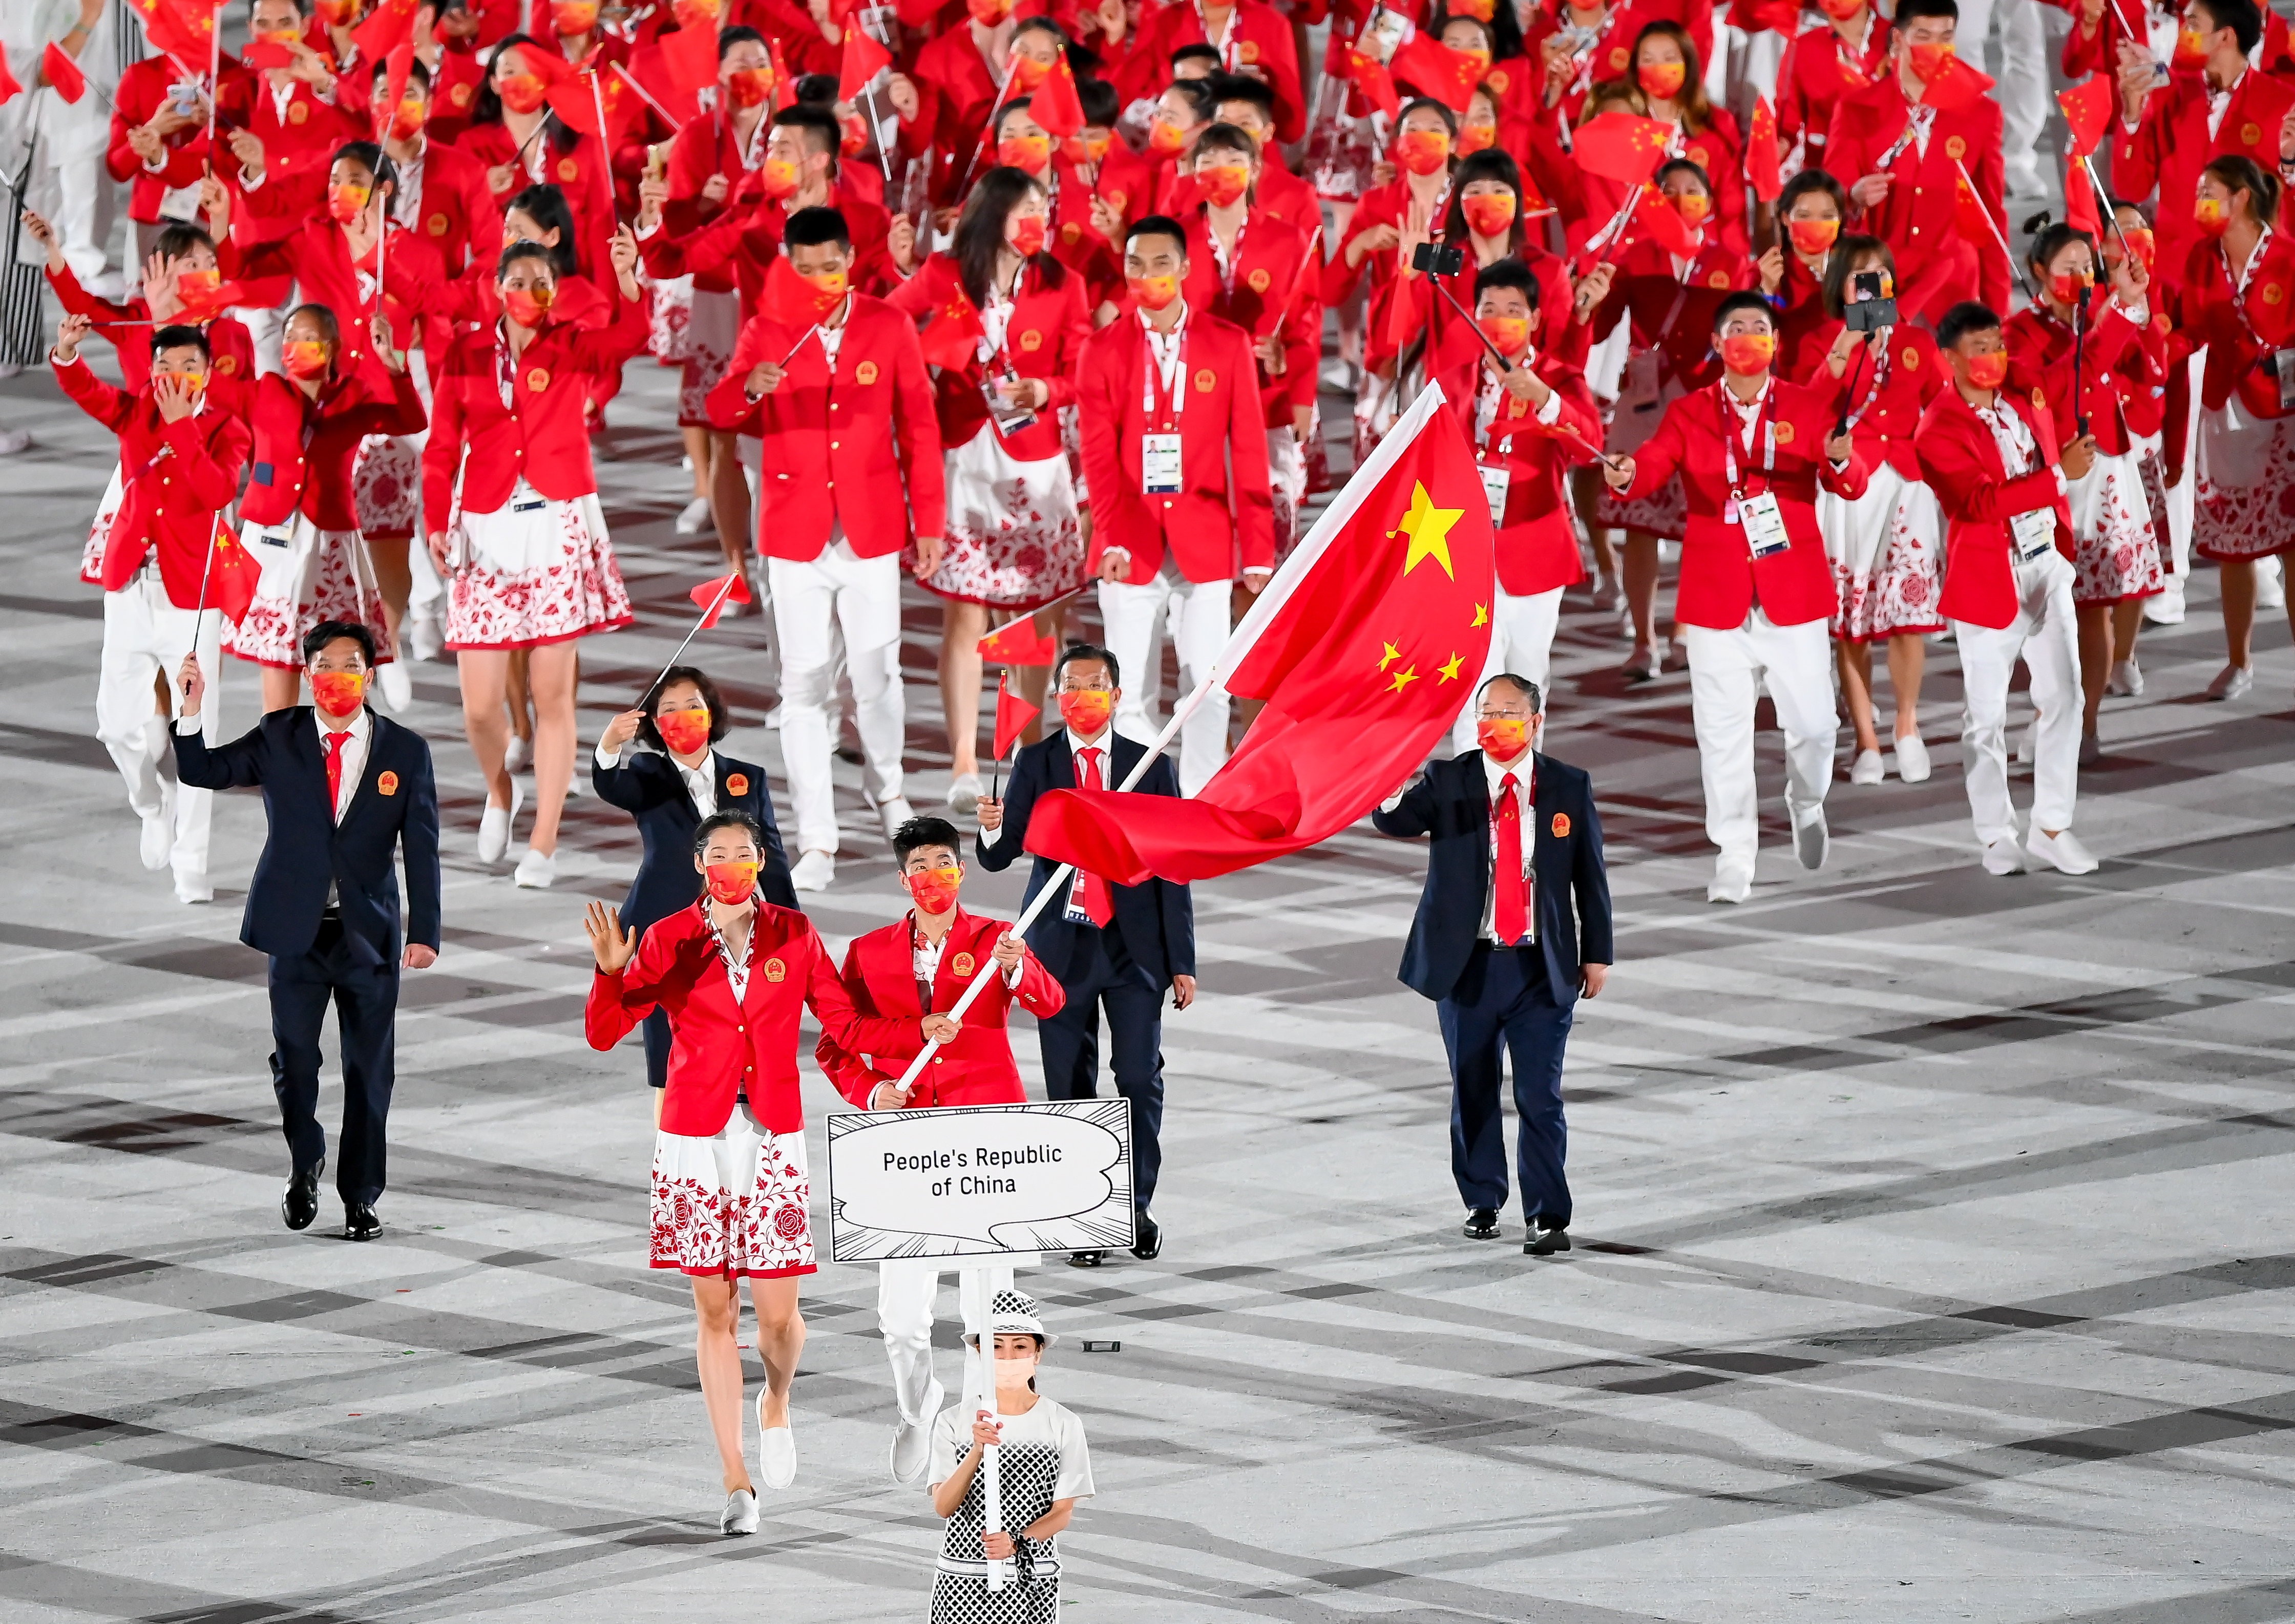 Tokyo , Japan - 23 July 2021; Team China flagbearers Ting Zhu and Shuai Zhao carry the Chinese flag during the 2020 Tokyo Summer Olympic Games opening ceremony at the Olympic Stadium in Tokyo, Japan. (Photo By Stephen McCarthy/Sportsfile via Getty Images) (Foto: Sportsfile via Getty Images)